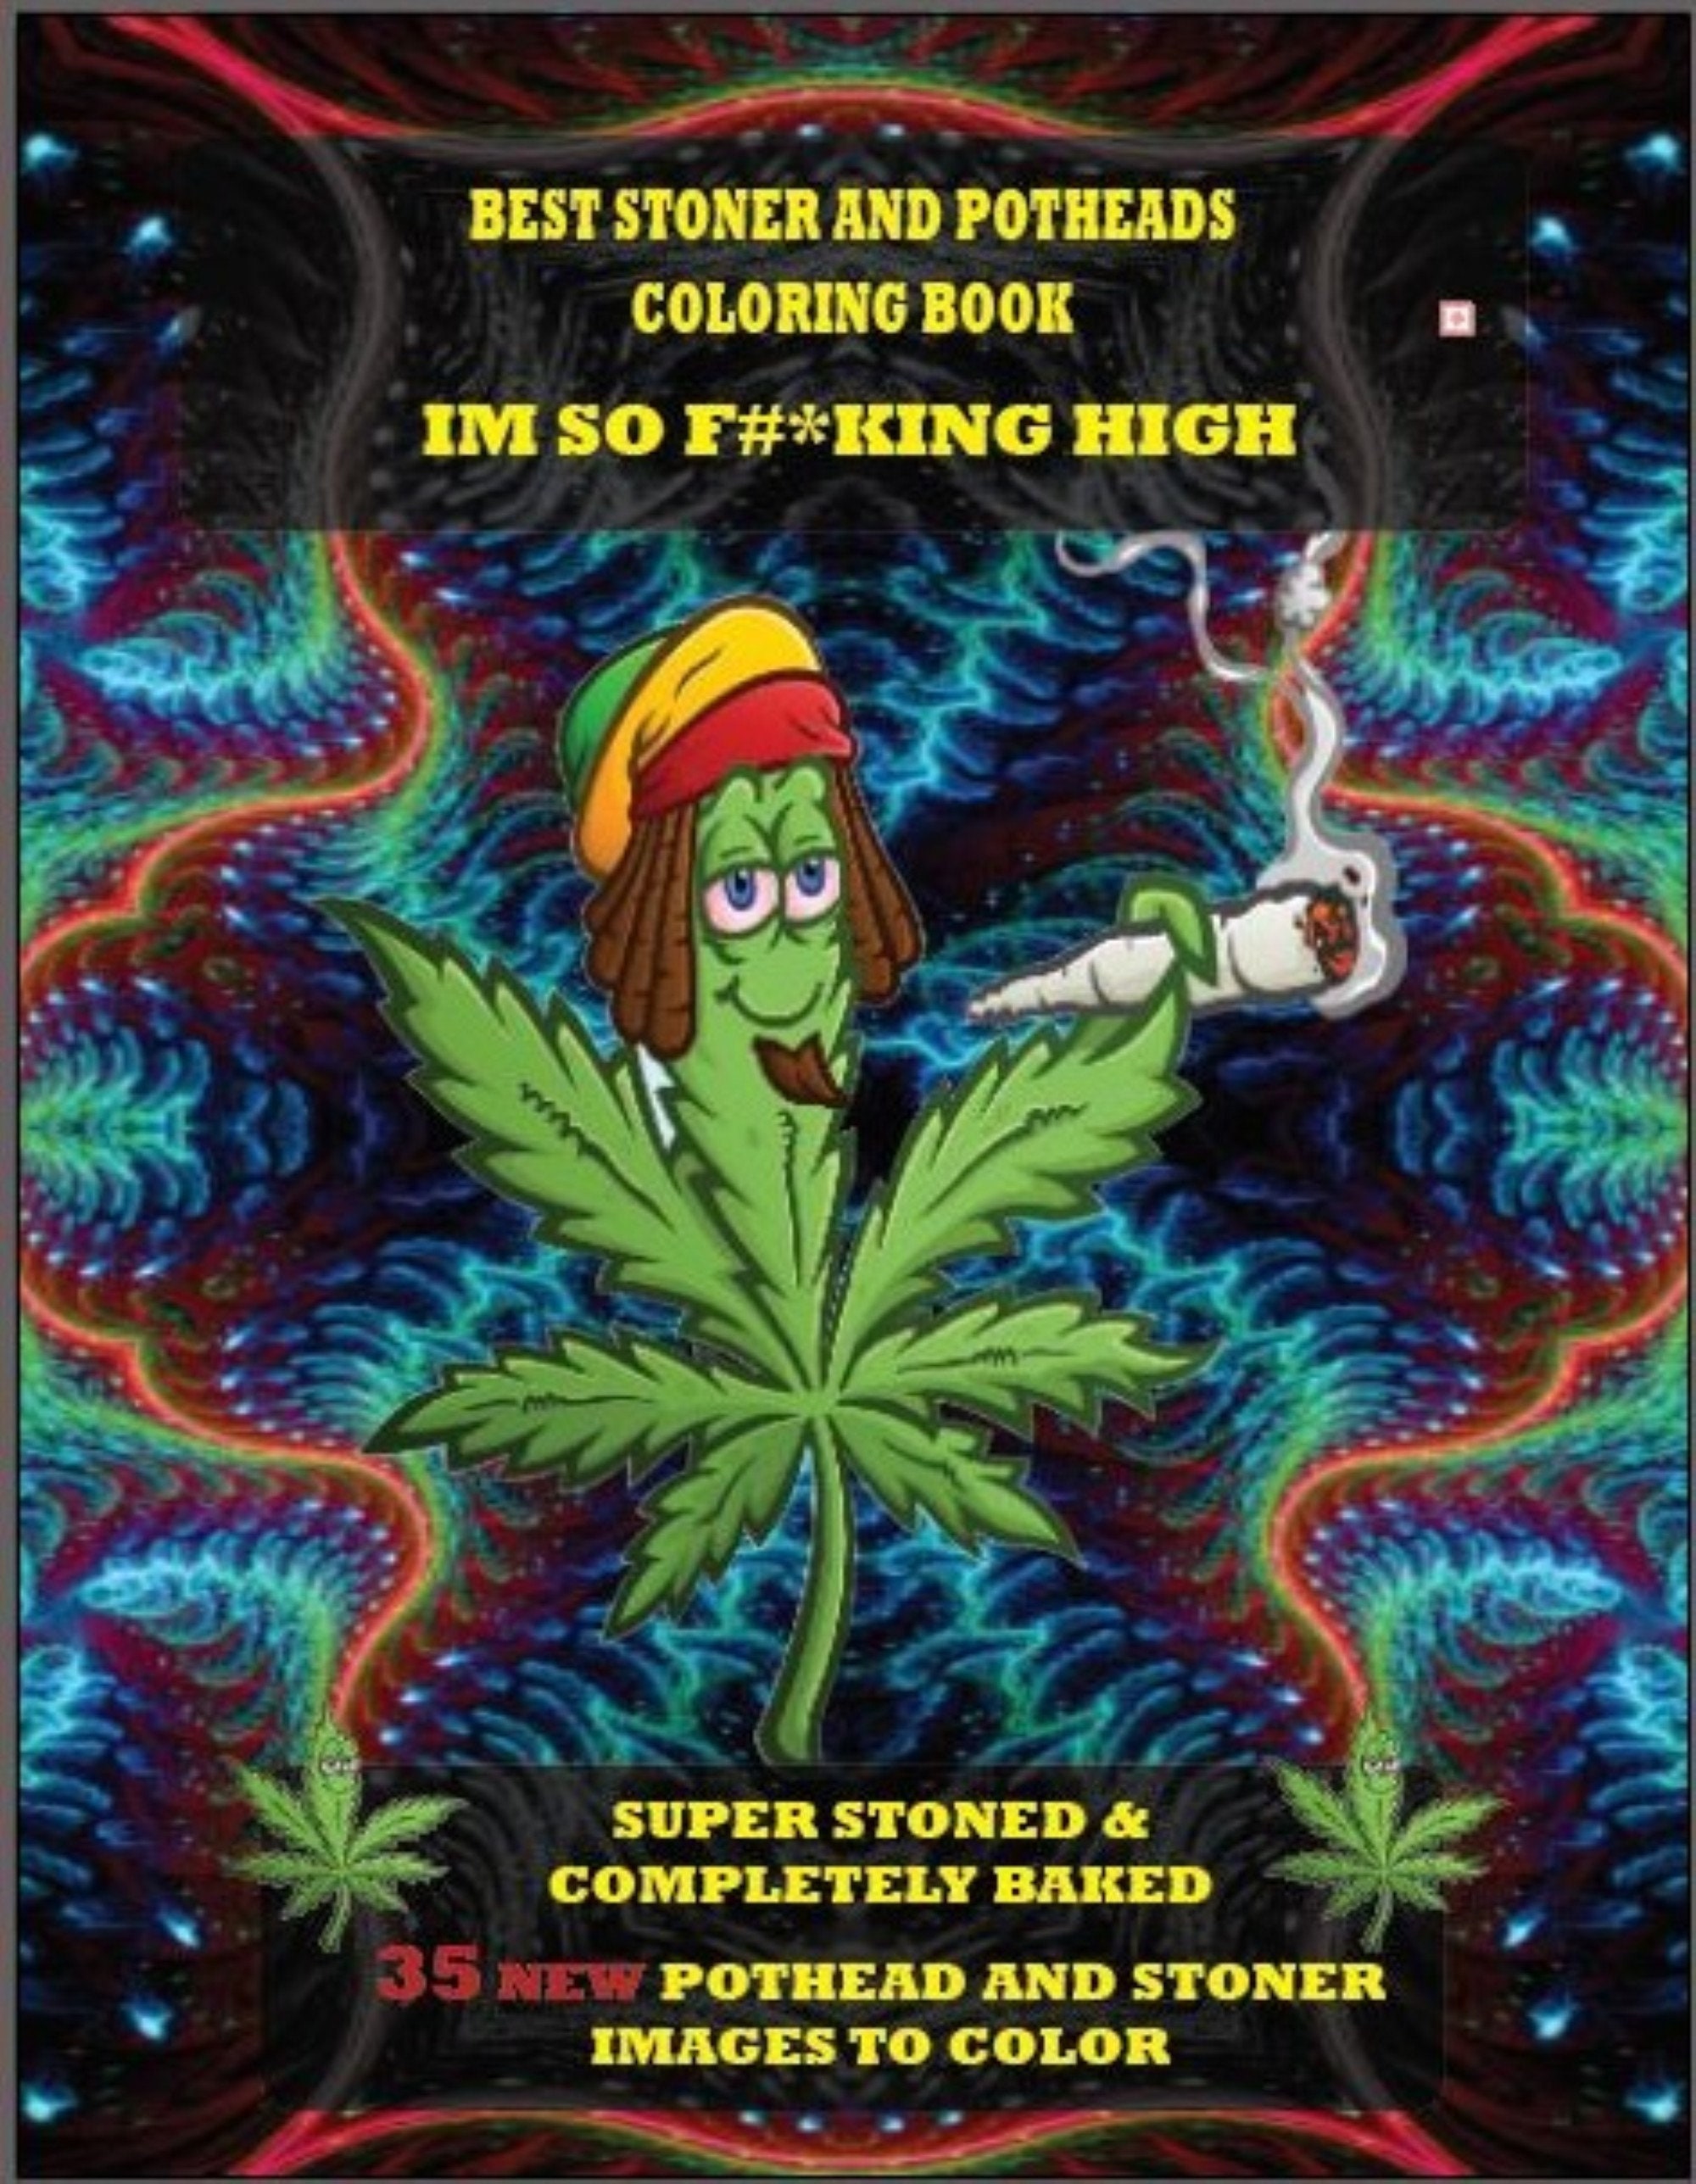 Best Stoner and Potheads Coloring Im Book so Fking High: Super